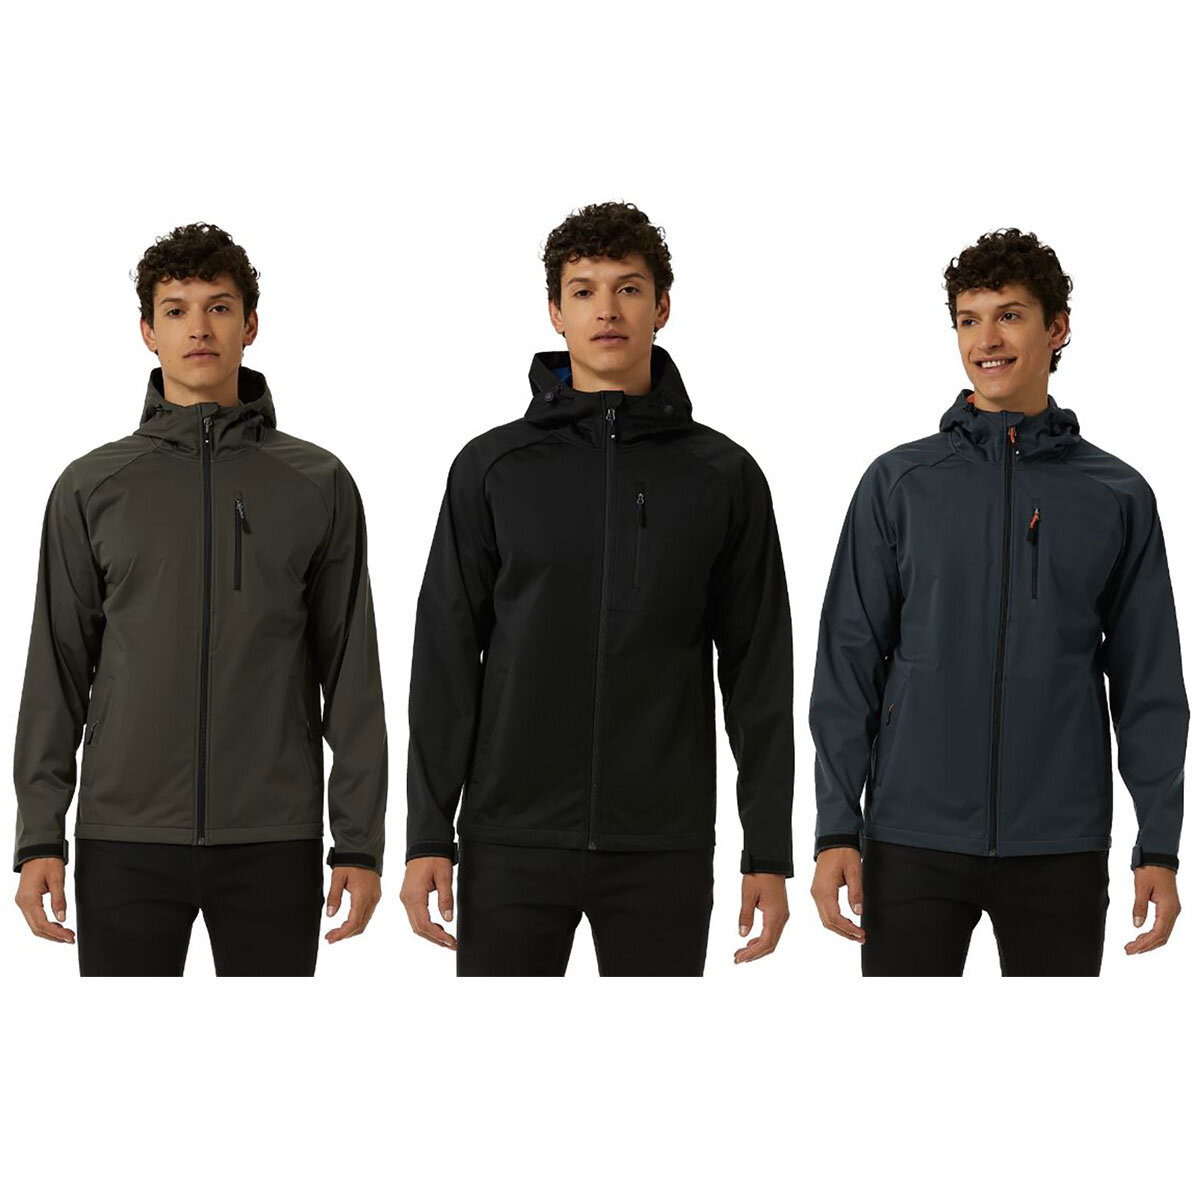 32 Degrees Men's Cool Active Coach Jacket in 3 Colours an...